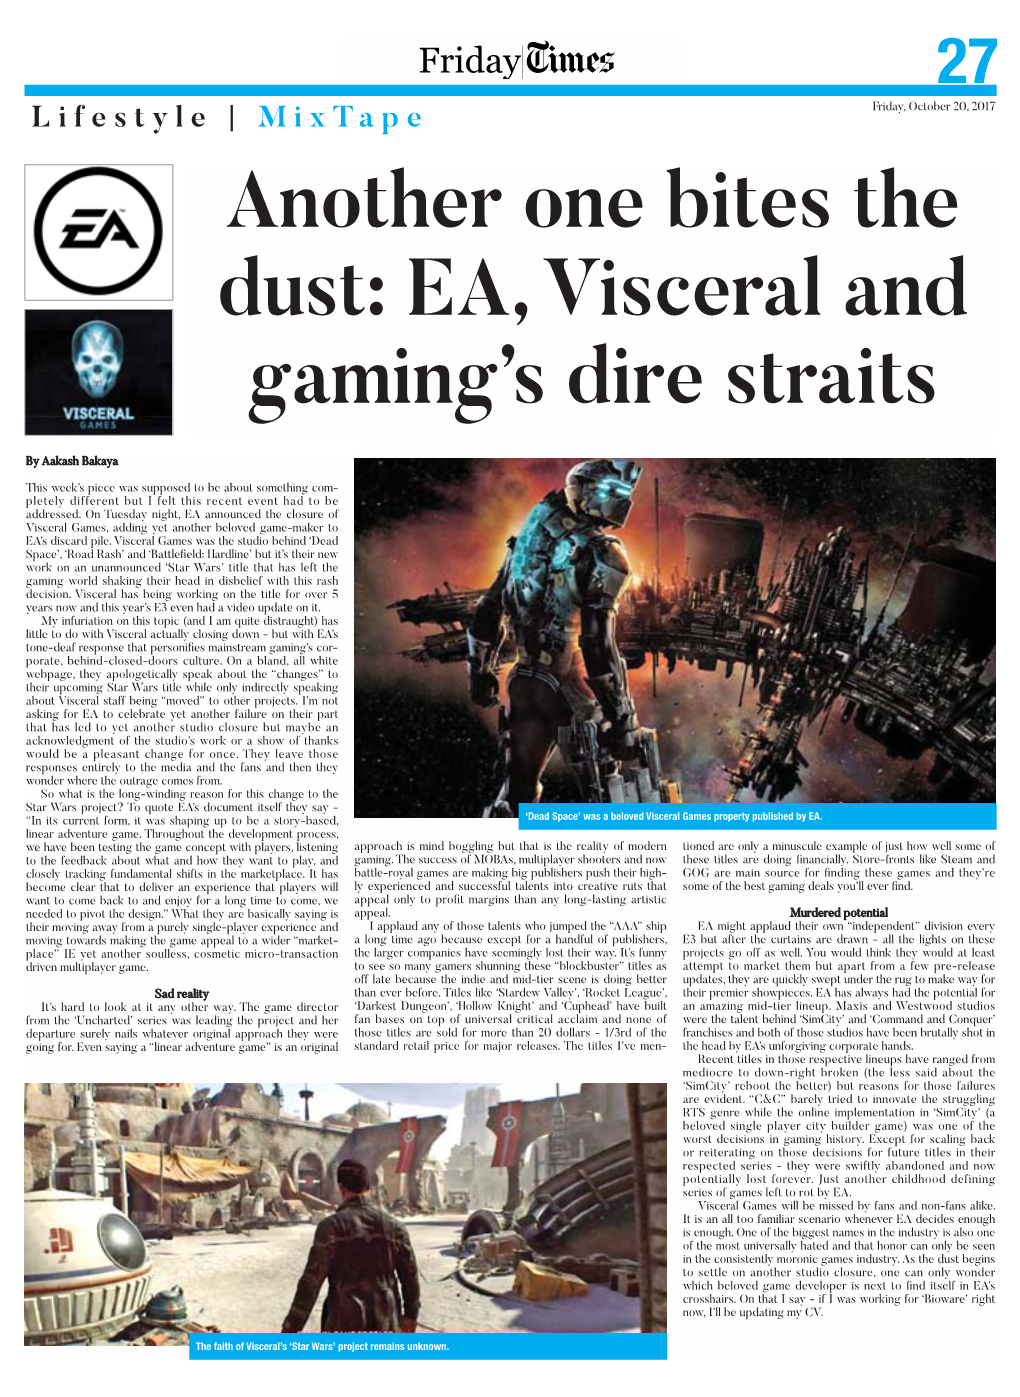 EA, Visceral and Gaming's Dire Straits